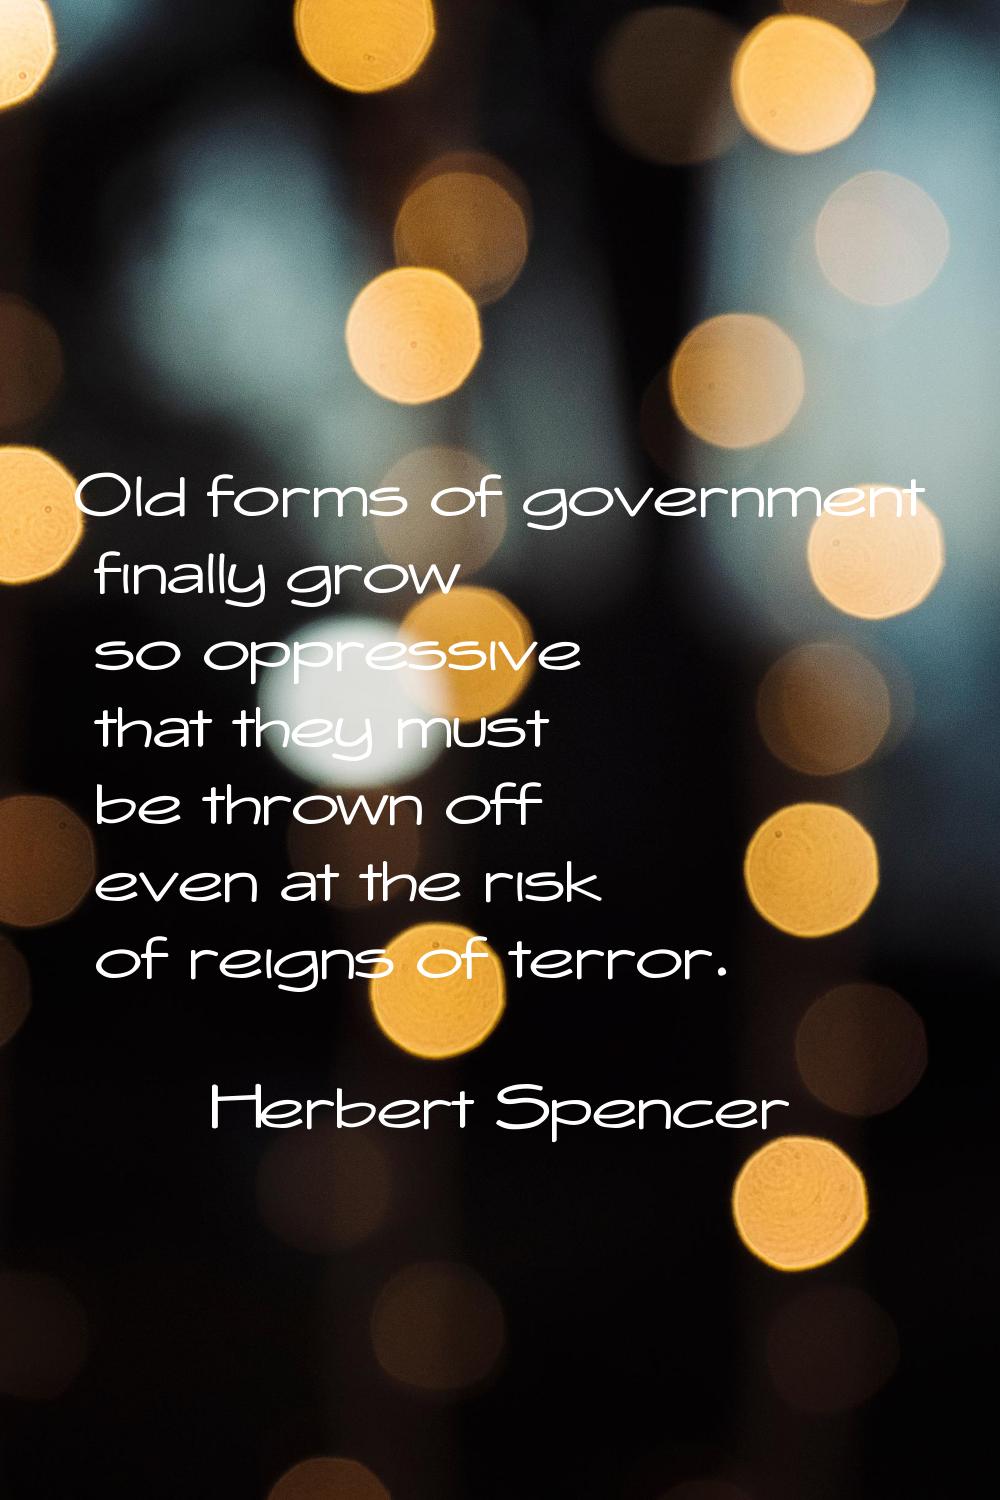 Old forms of government finally grow so oppressive that they must be thrown off even at the risk of